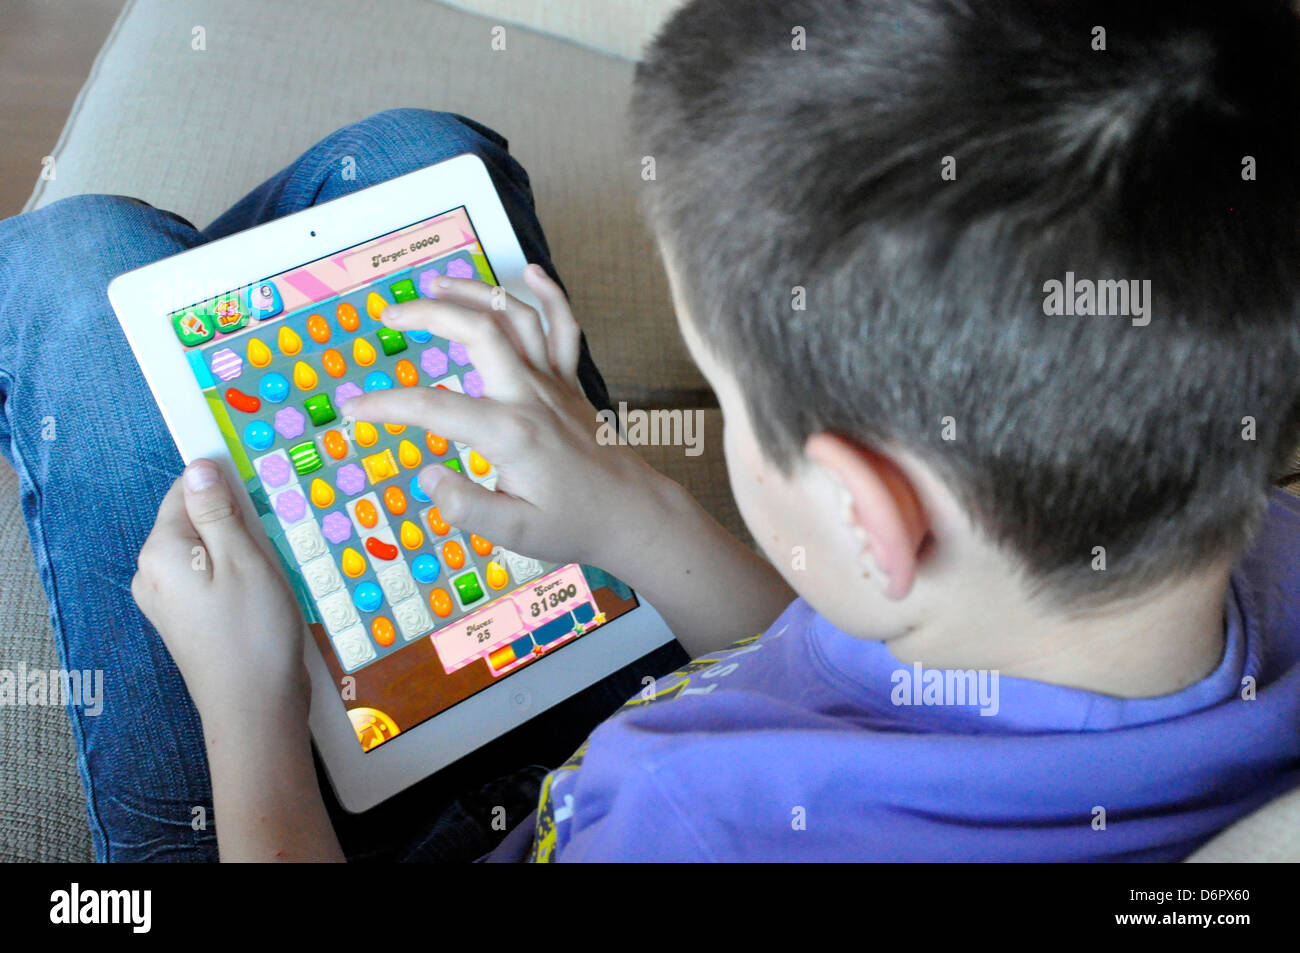 candy crush saga game ipad boy playing addicted winning concentrate game child Stock Photo